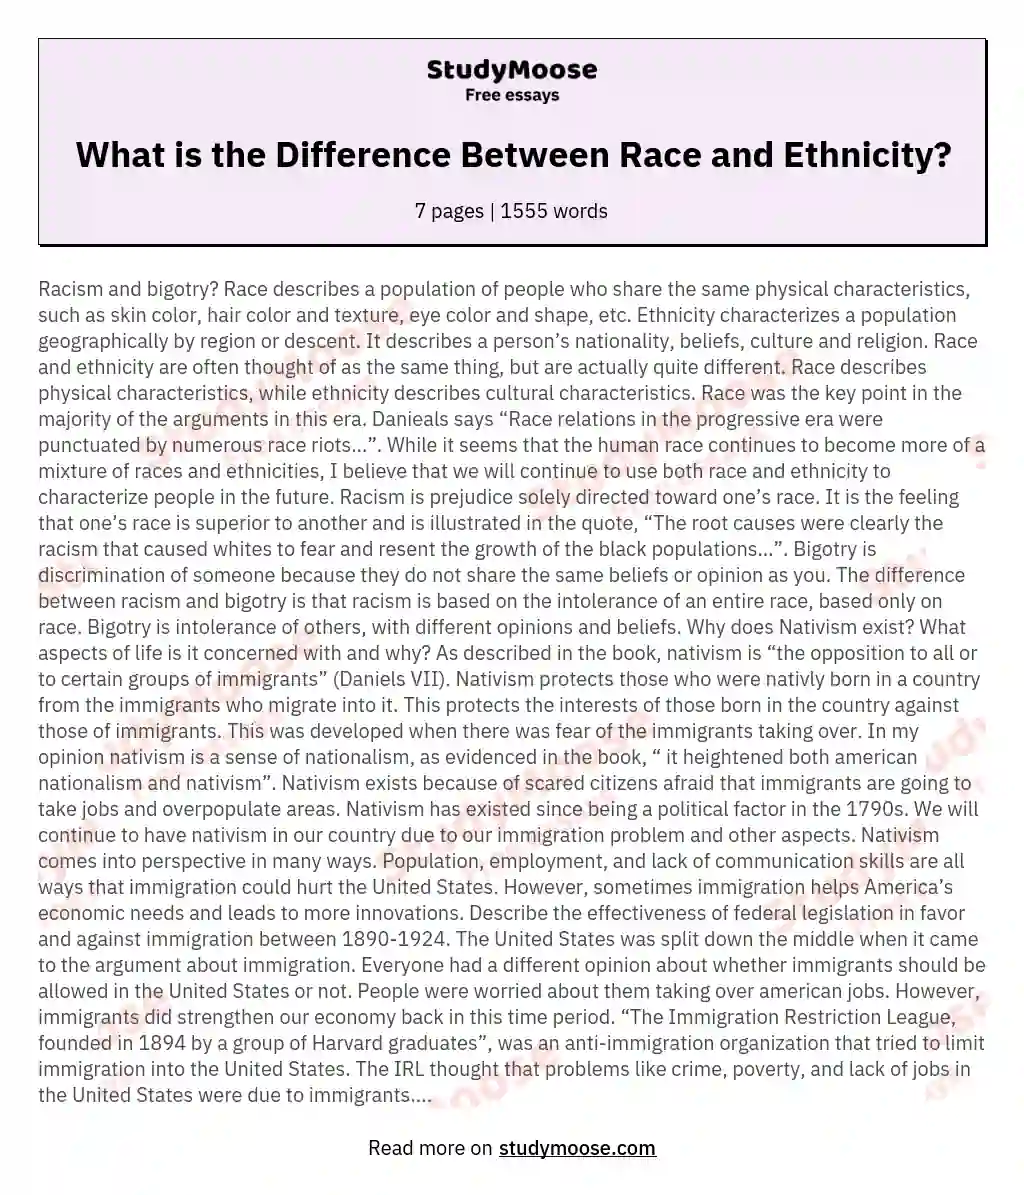 What is the Difference Between Race and Ethnicity? essay